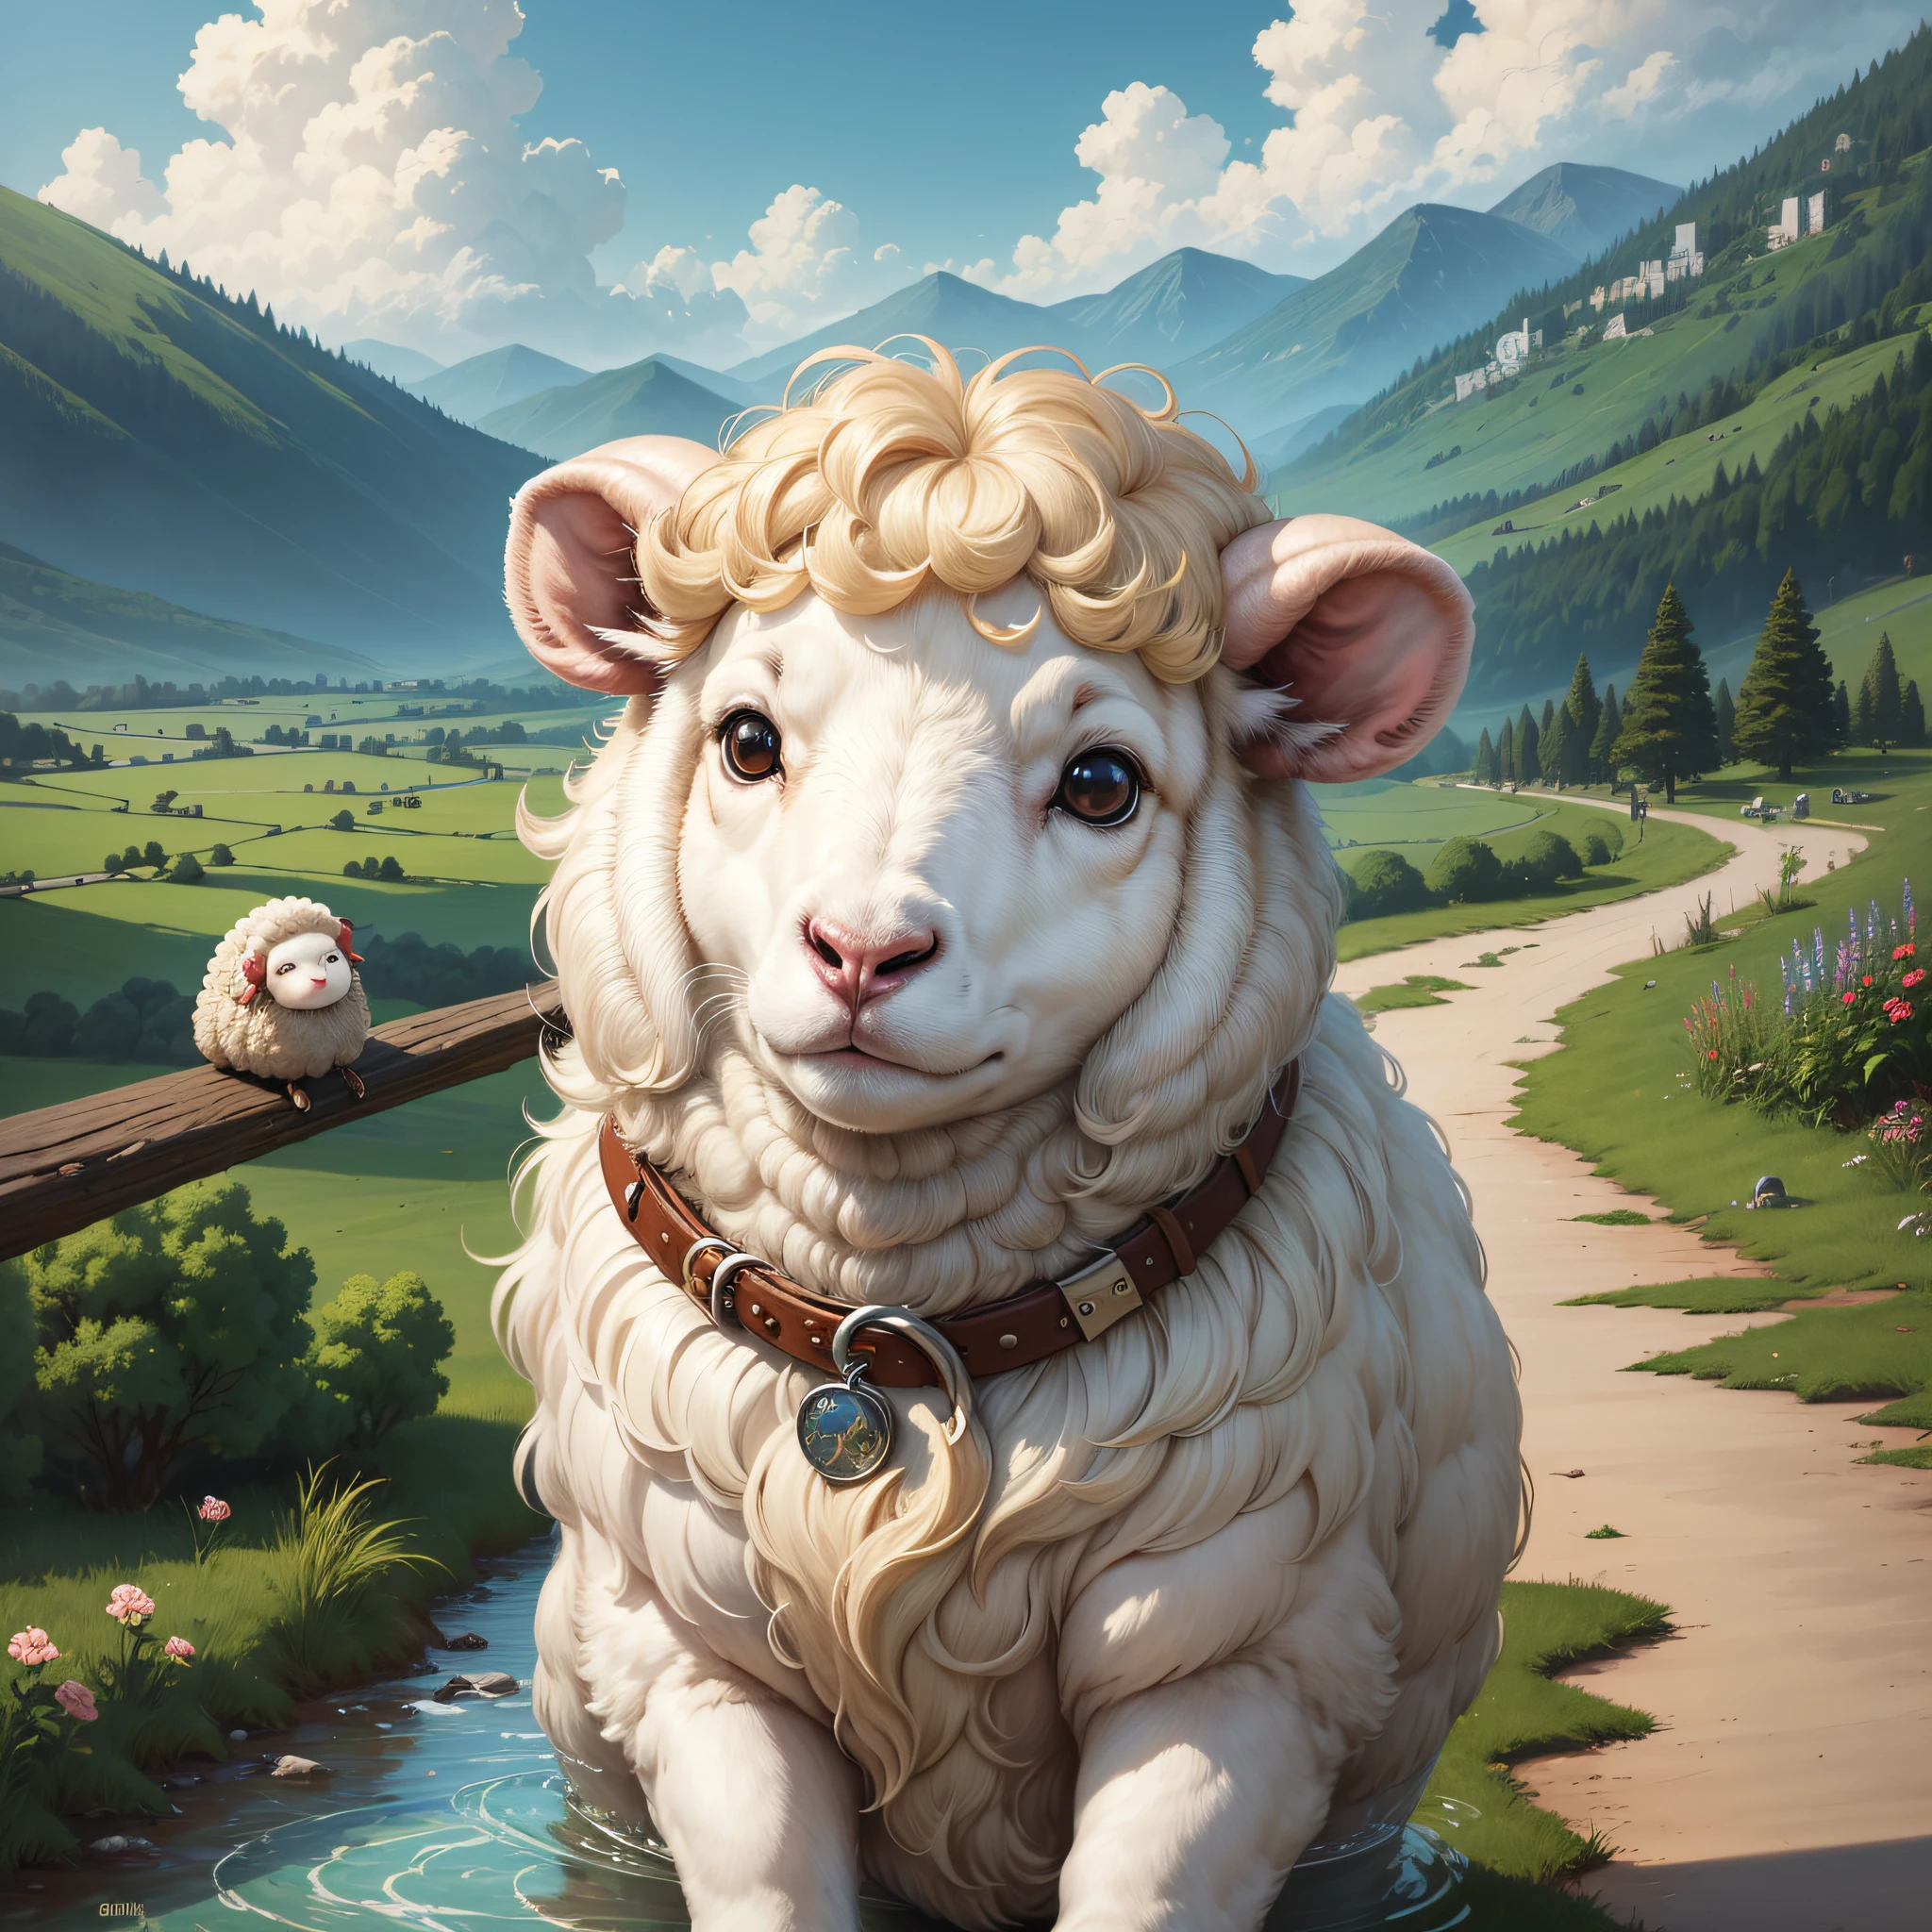 Painting of a sheep with a long hair and a collar - SeaArt AI